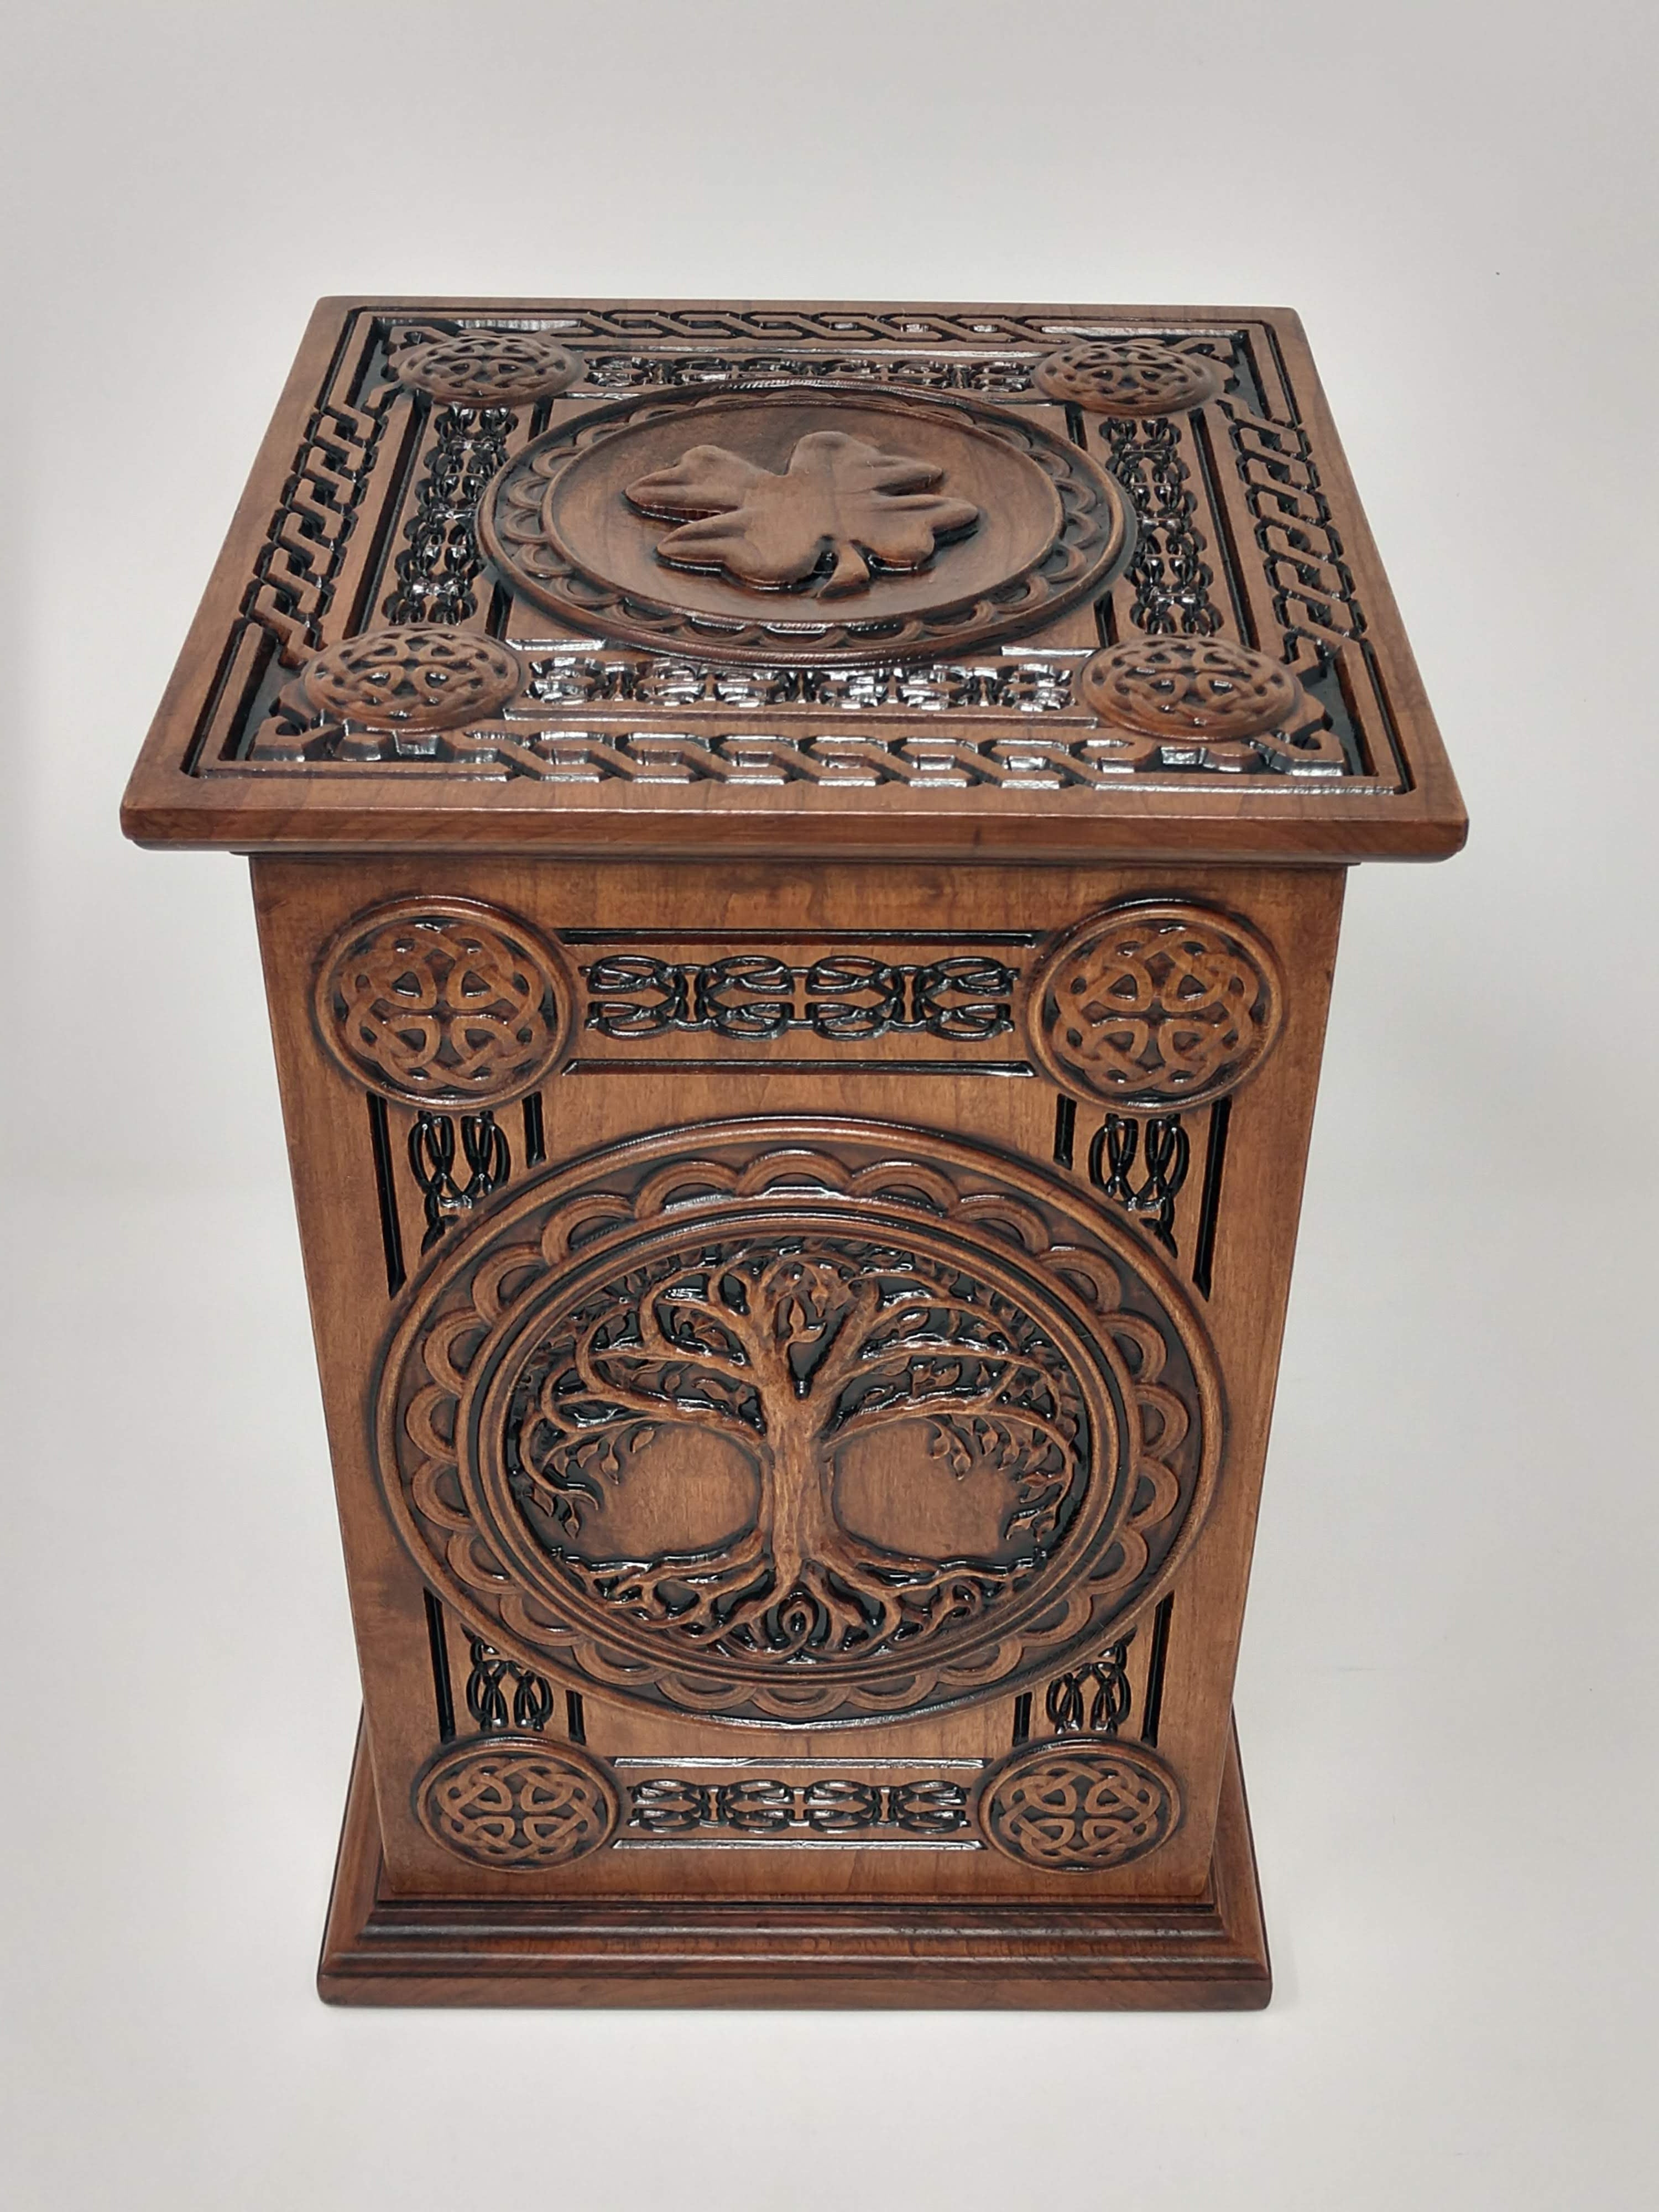 Celtic Tree of Life Urn carved with Tree of Life on front with ornate Celtic carvings around. The top of the urns for cremation ashes is the carving of a shamrock and more Celtic knot boarders and accents.